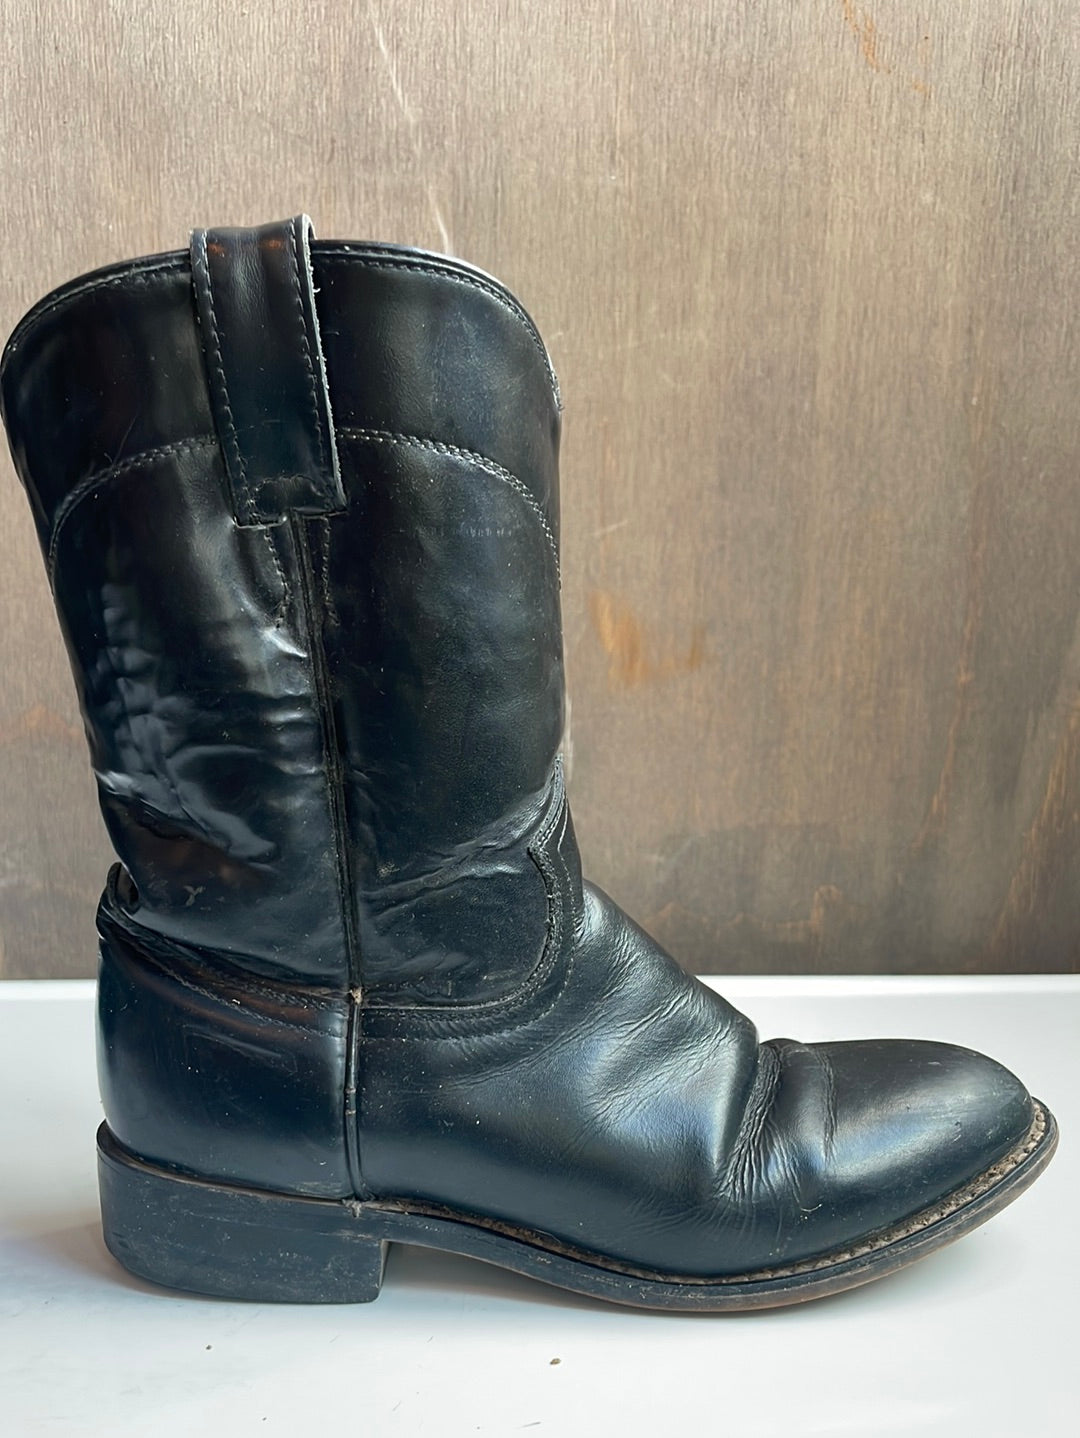 Justin’s Black Leather Youth Boots